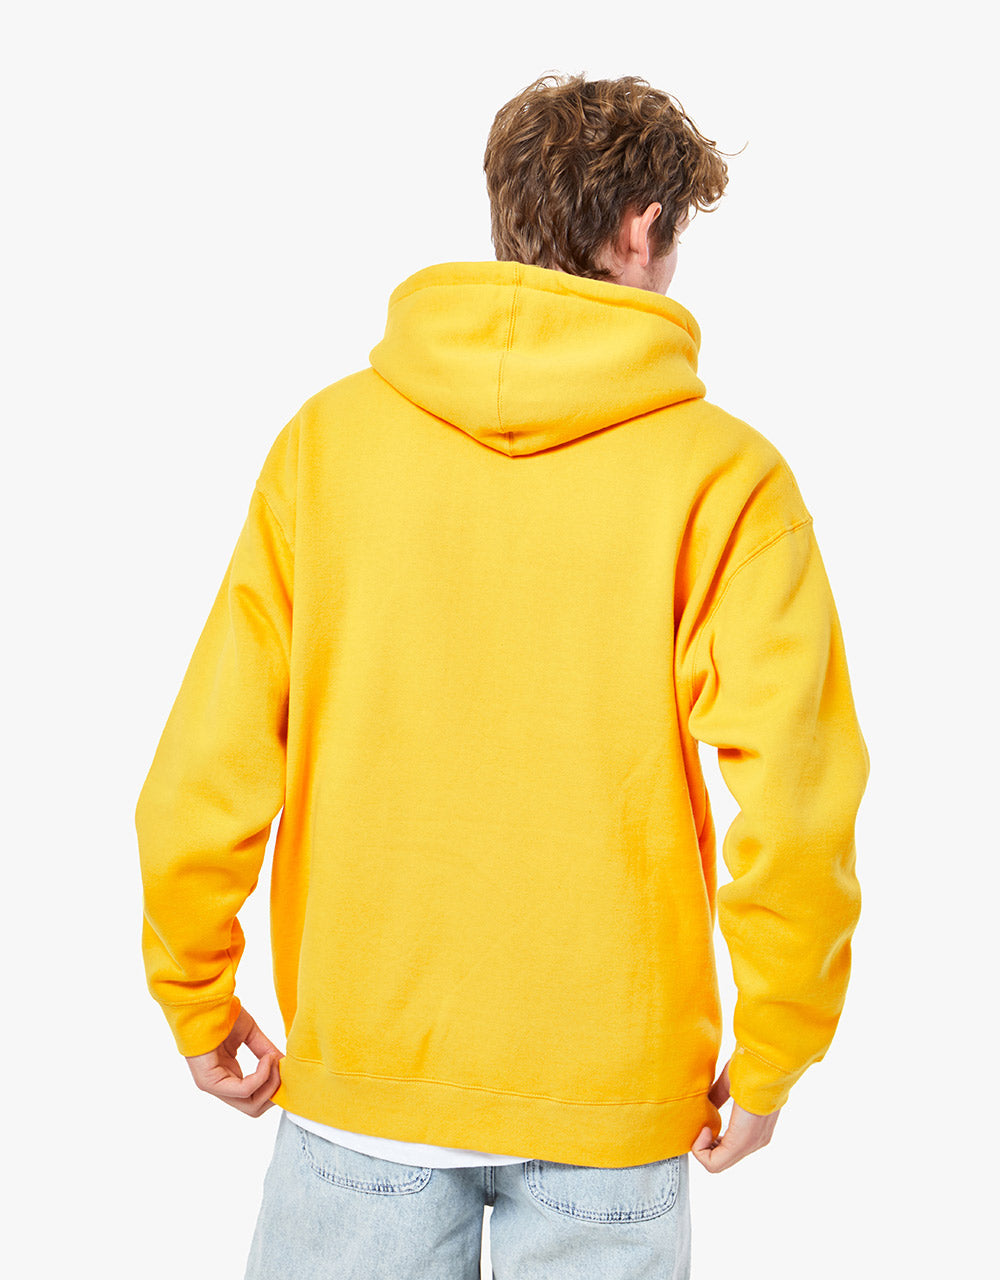 WKND Hibiscus Pullover Hoodie - Gold